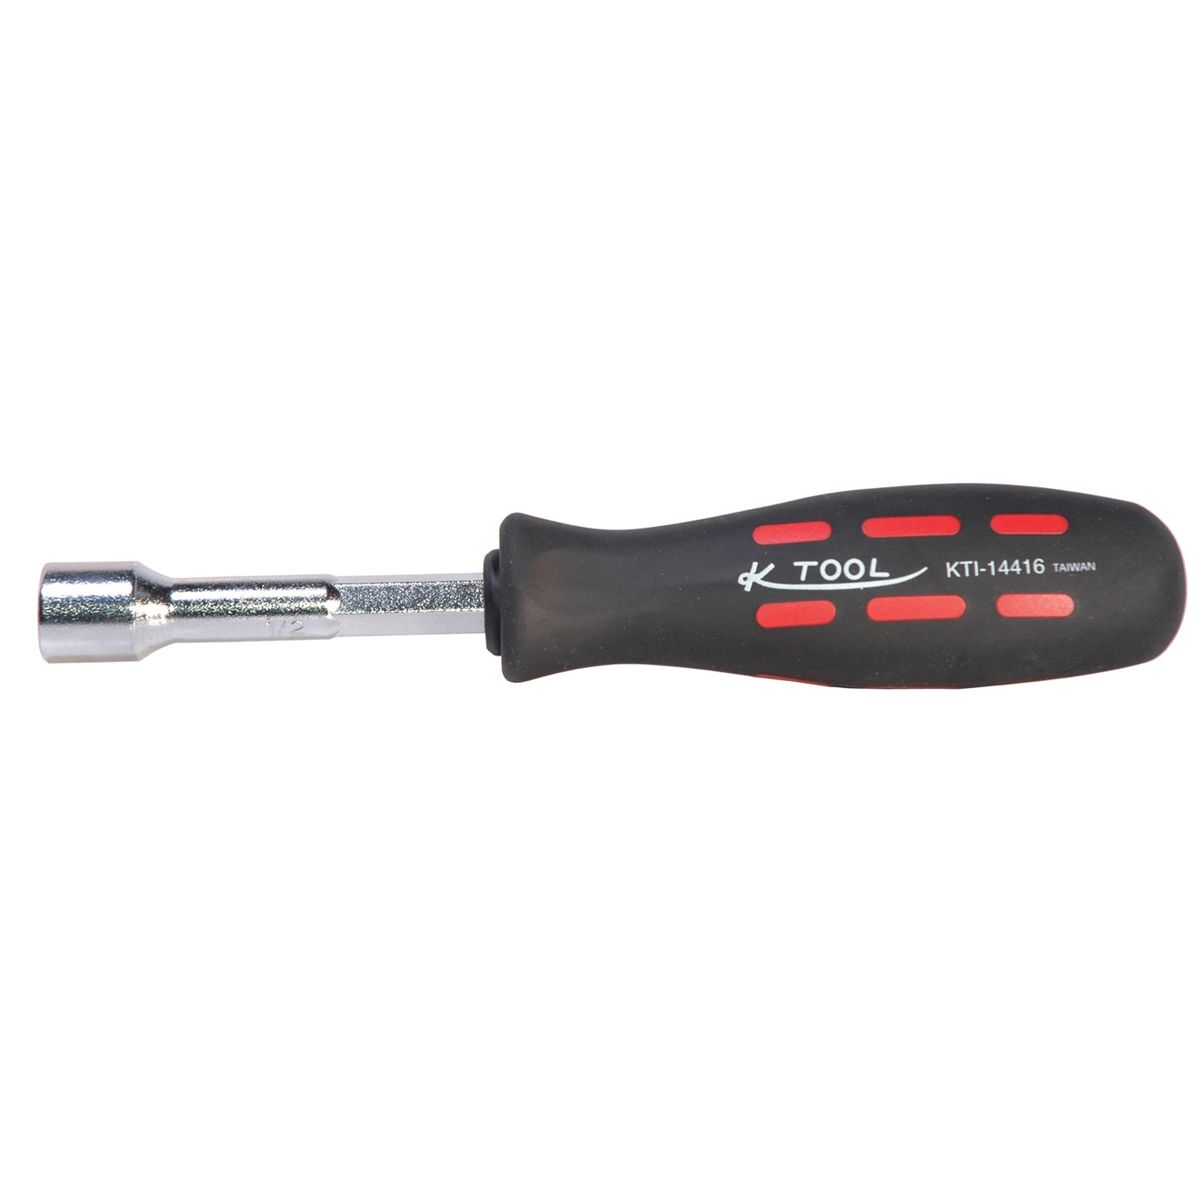 1/2" x 3" Fractional Nut Driver